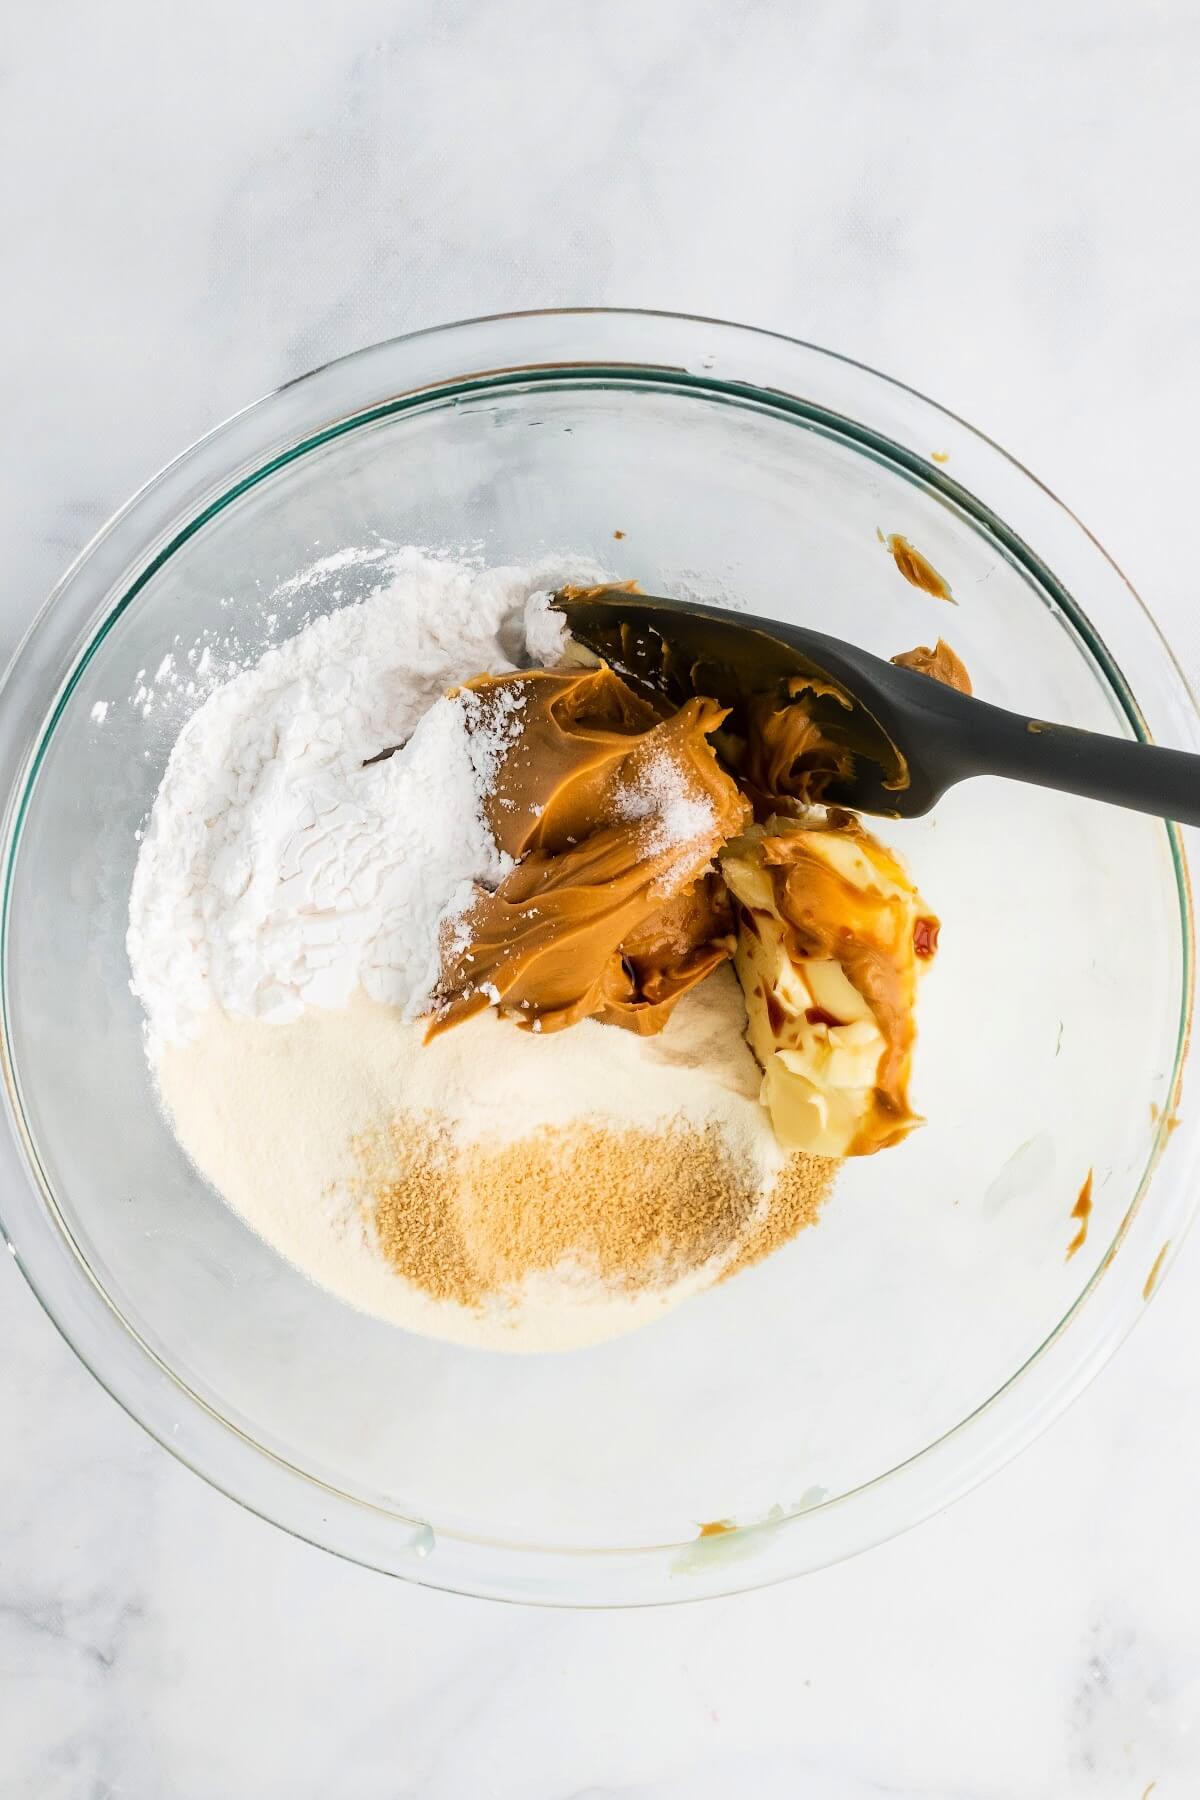 A glass mixing bowl filled with peanut butter, butter, vanilla, arrowroot powder, collagen, maple sugar and a spatula about to stir the mixture.